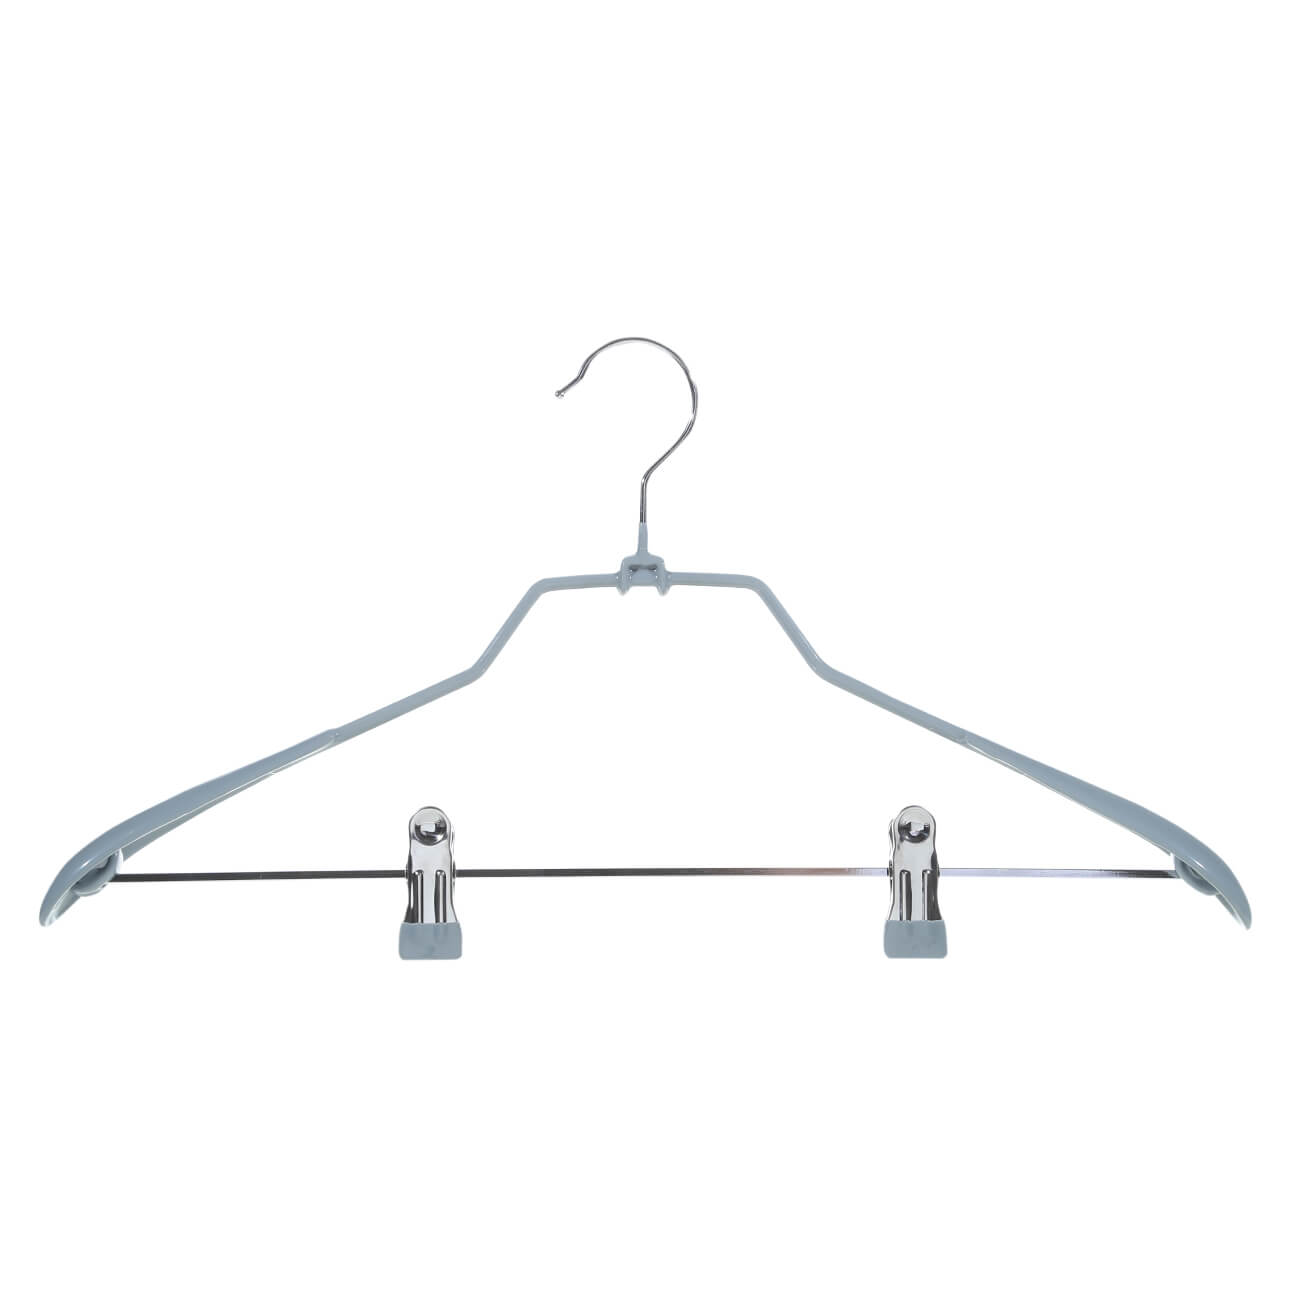 Hanger, 44 cm, with clips for trousers/skirts, metal coated, Gray, Colorful house изображение № 1